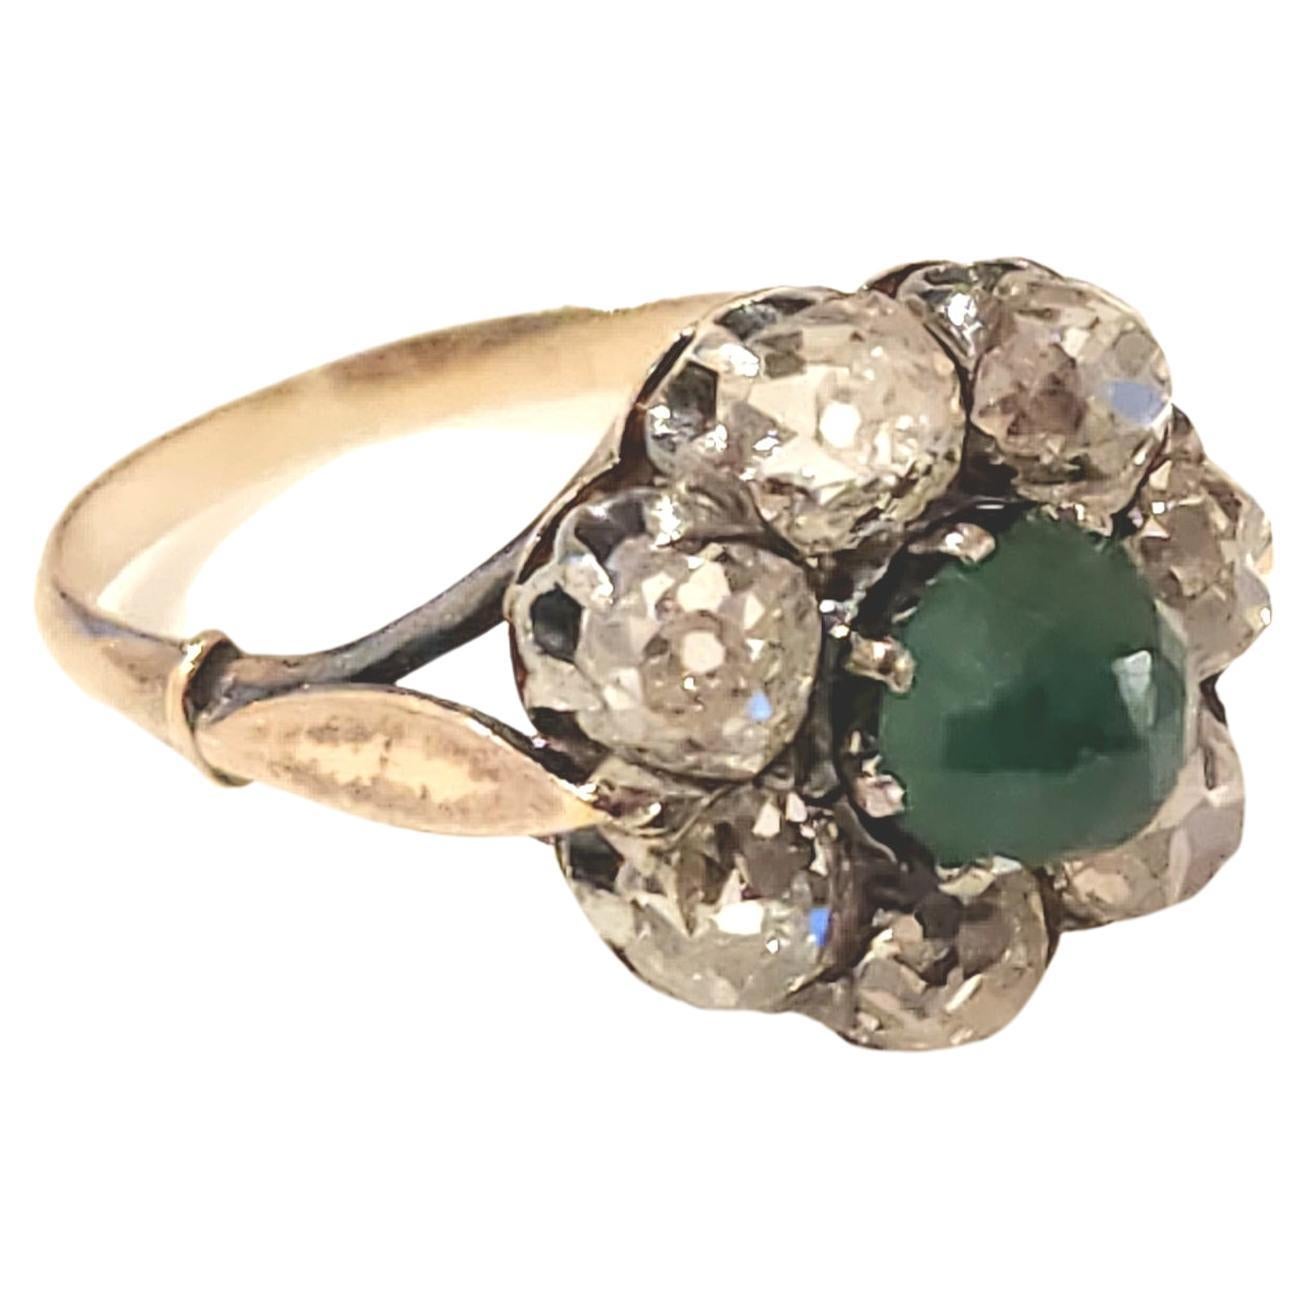 Antique 14k gold ring centered with natural green emerald flanked with large old mine cut diamonds estimste weight of 3 carats in excellent spark in a floral ring designe dates back to europe 1910.c